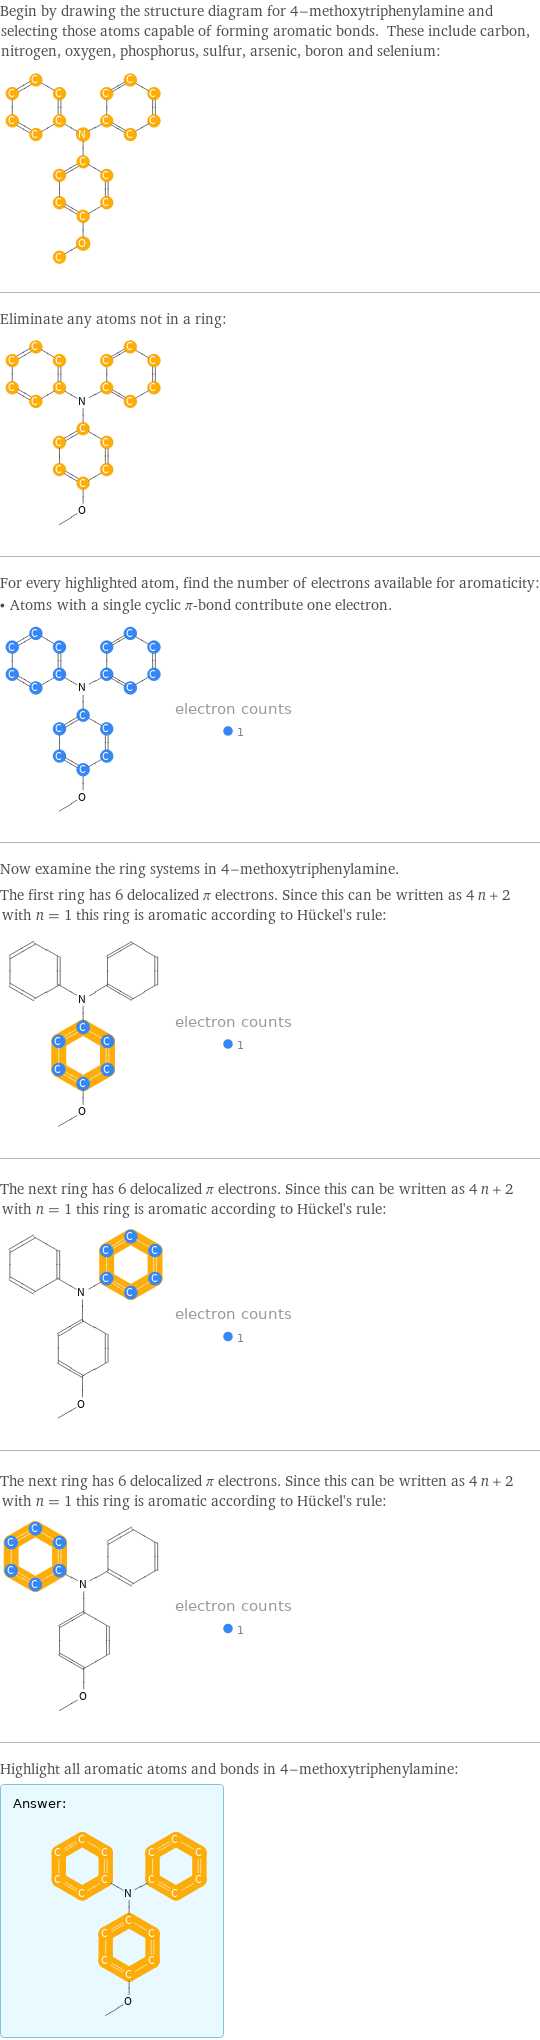 Begin by drawing the structure diagram for 4-methoxytriphenylamine and selecting those atoms capable of forming aromatic bonds. These include carbon, nitrogen, oxygen, phosphorus, sulfur, arsenic, boron and selenium:  Eliminate any atoms not in a ring:  For every highlighted atom, find the number of electrons available for aromaticity: • Atoms with a single cyclic π-bond contribute one electron.  Now examine the ring systems in 4-methoxytriphenylamine. The first ring has 6 delocalized π electrons. Since this can be written as 4 n + 2 with n = 1 this ring is aromatic according to Hückel's rule:  The next ring has 6 delocalized π electrons. Since this can be written as 4 n + 2 with n = 1 this ring is aromatic according to Hückel's rule:  The next ring has 6 delocalized π electrons. Since this can be written as 4 n + 2 with n = 1 this ring is aromatic according to Hückel's rule:  Highlight all aromatic atoms and bonds in 4-methoxytriphenylamine: Answer: |   | 